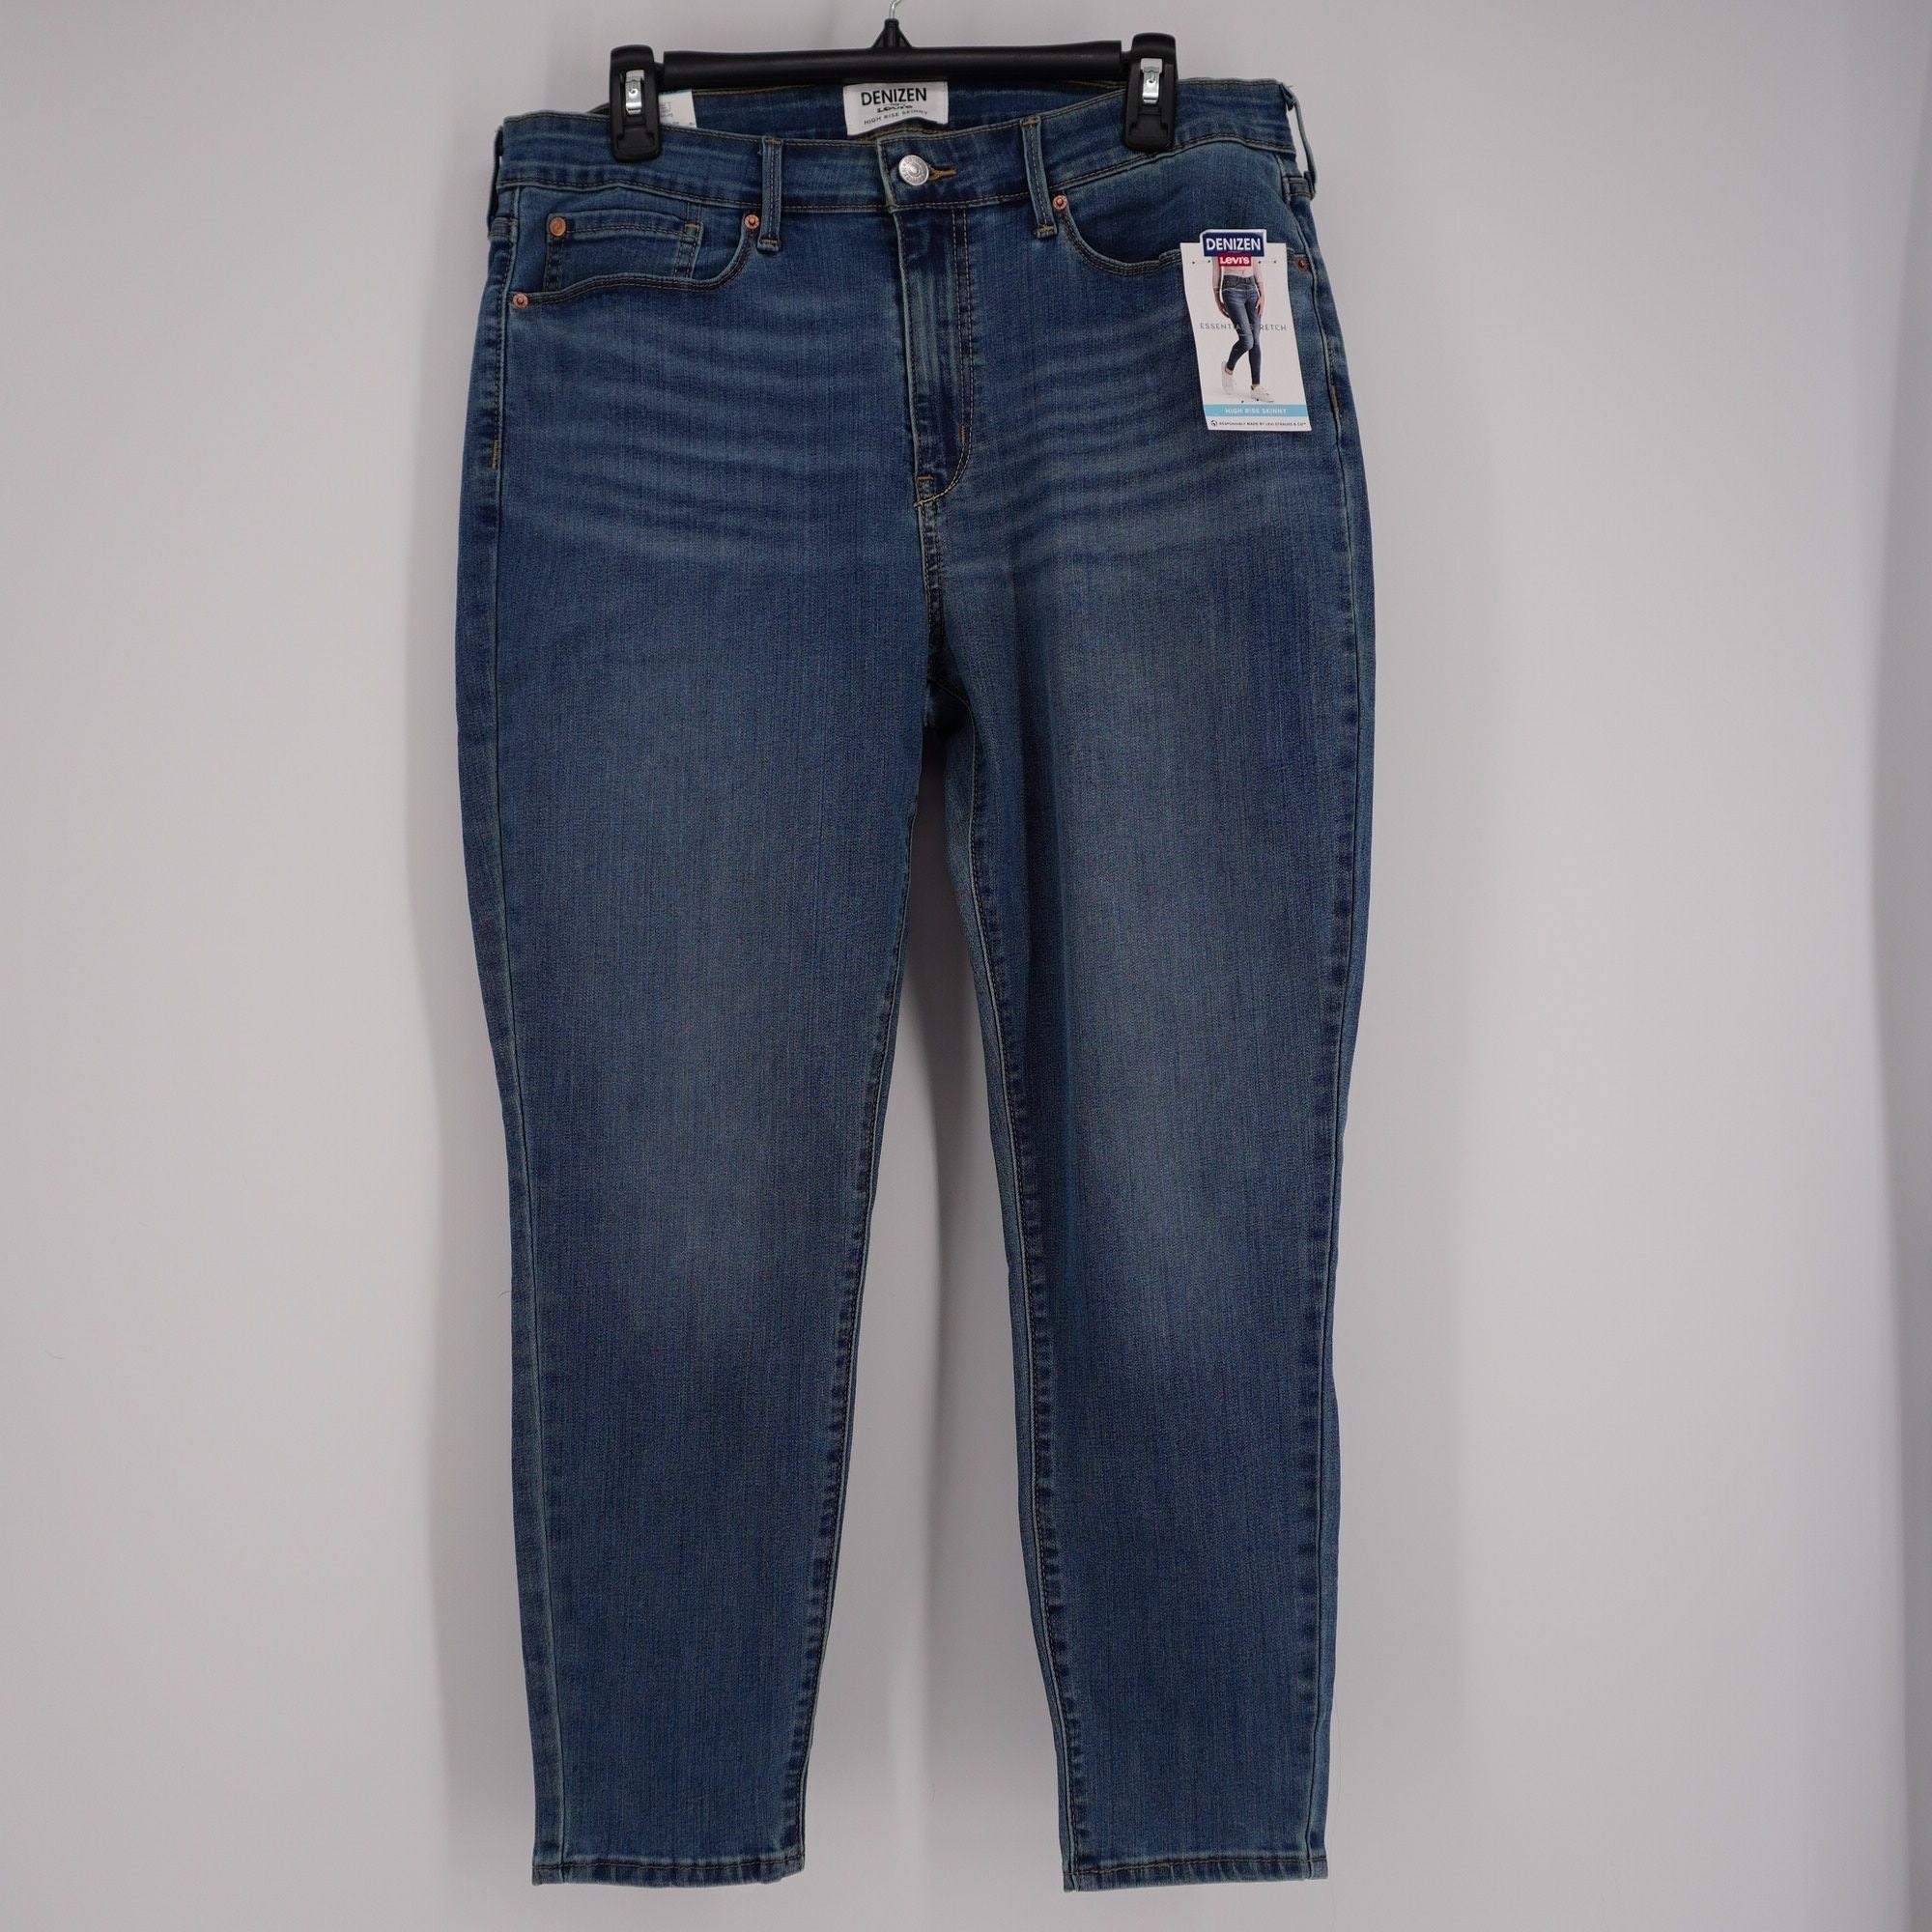 Denizen from Levi's NWT Women's Medium Wash High Rise Skinny Jeans 16S –  Two Soul Sisters Resale